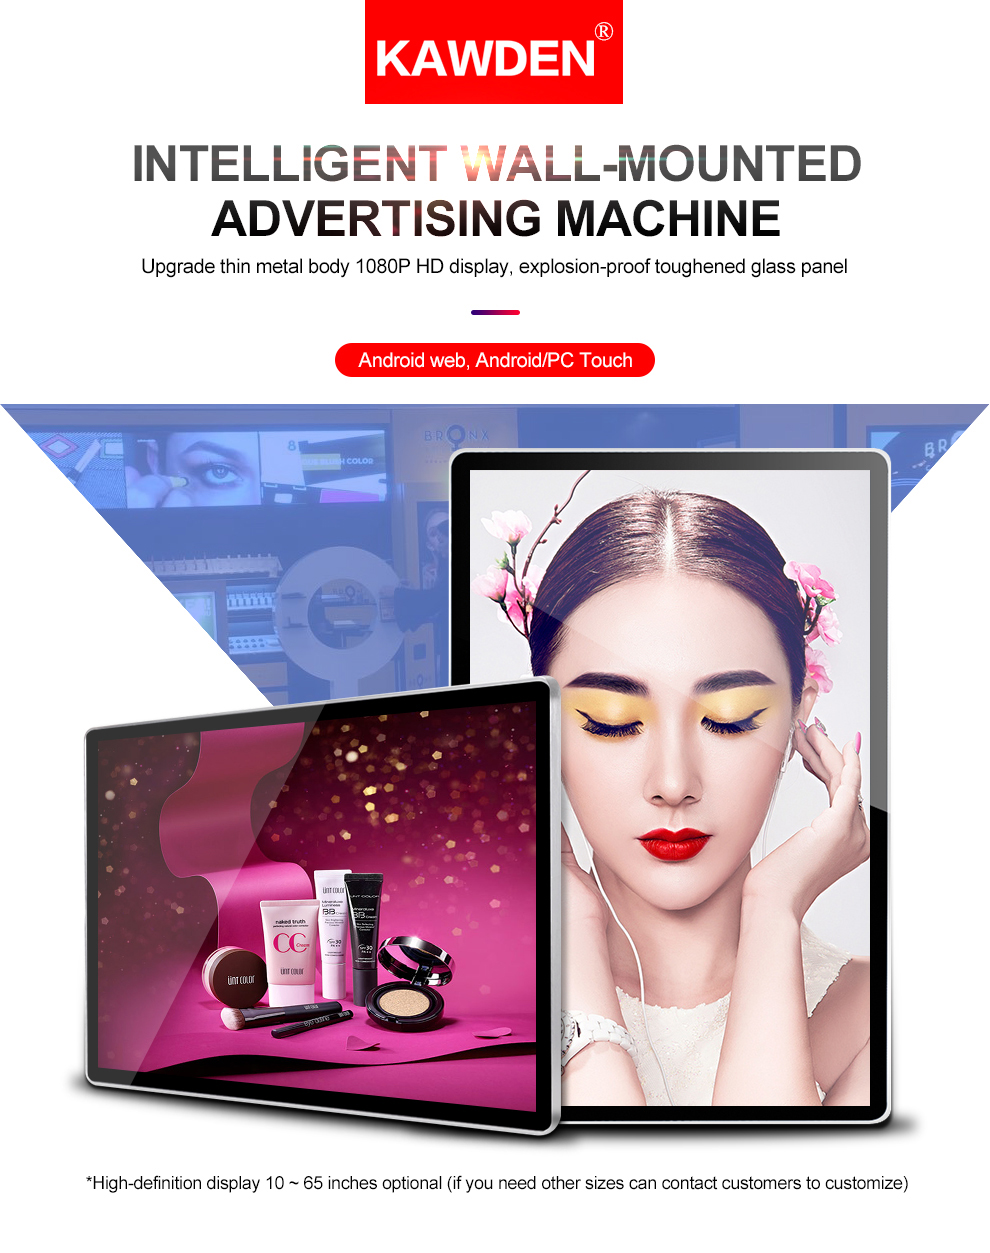 Product introduction of 21.5-inch LCD advertising machine with super narrow wall